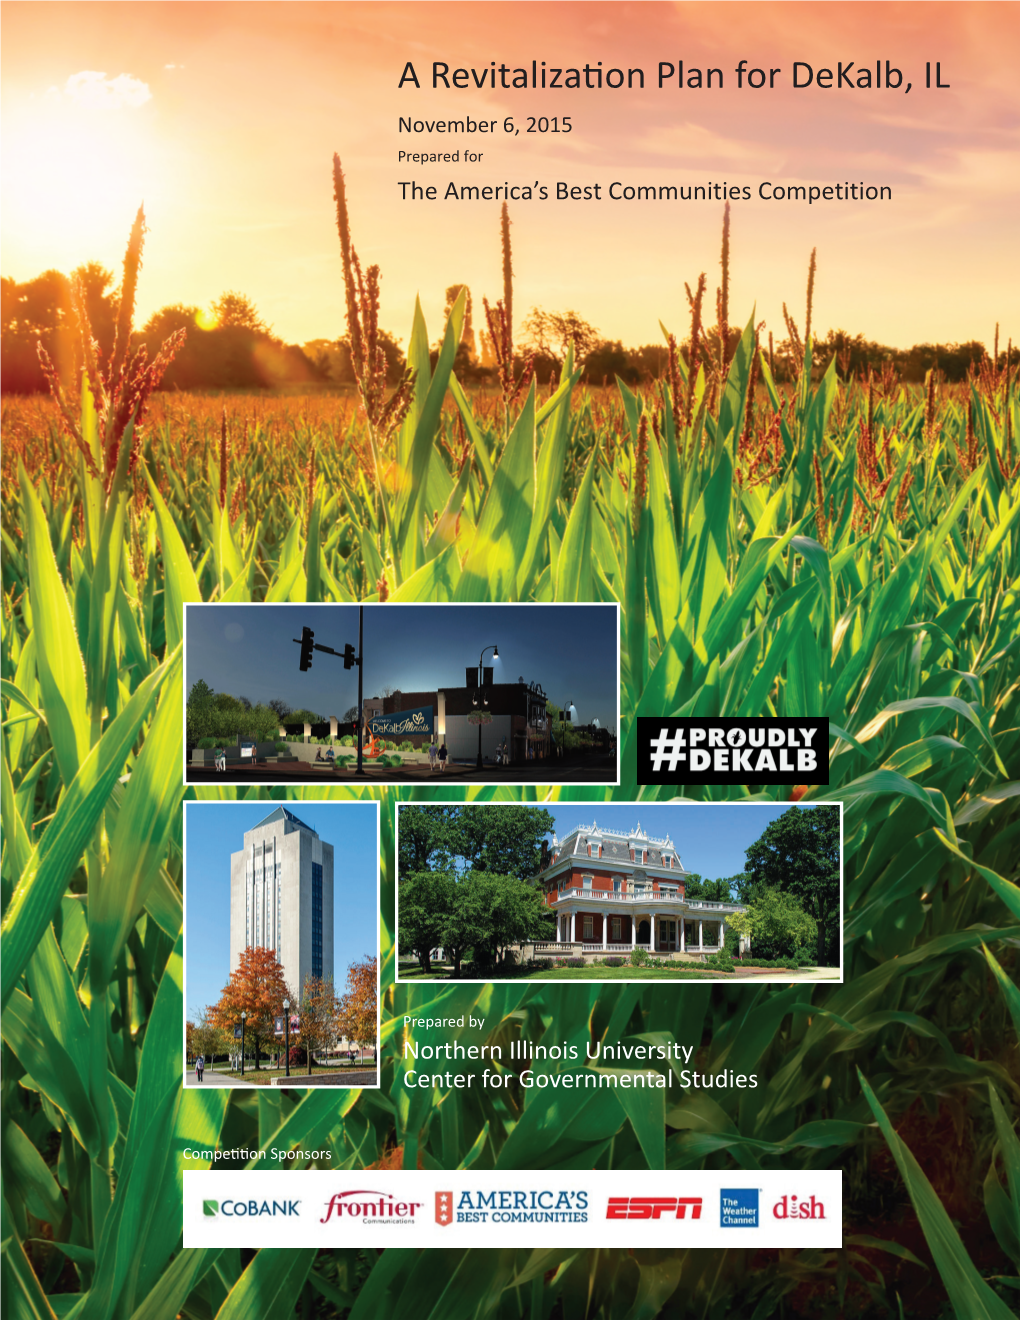 A Revitalization Plan for Dekalb, IL November 6, 2015 Prepared for the America’S Best Communities Competition